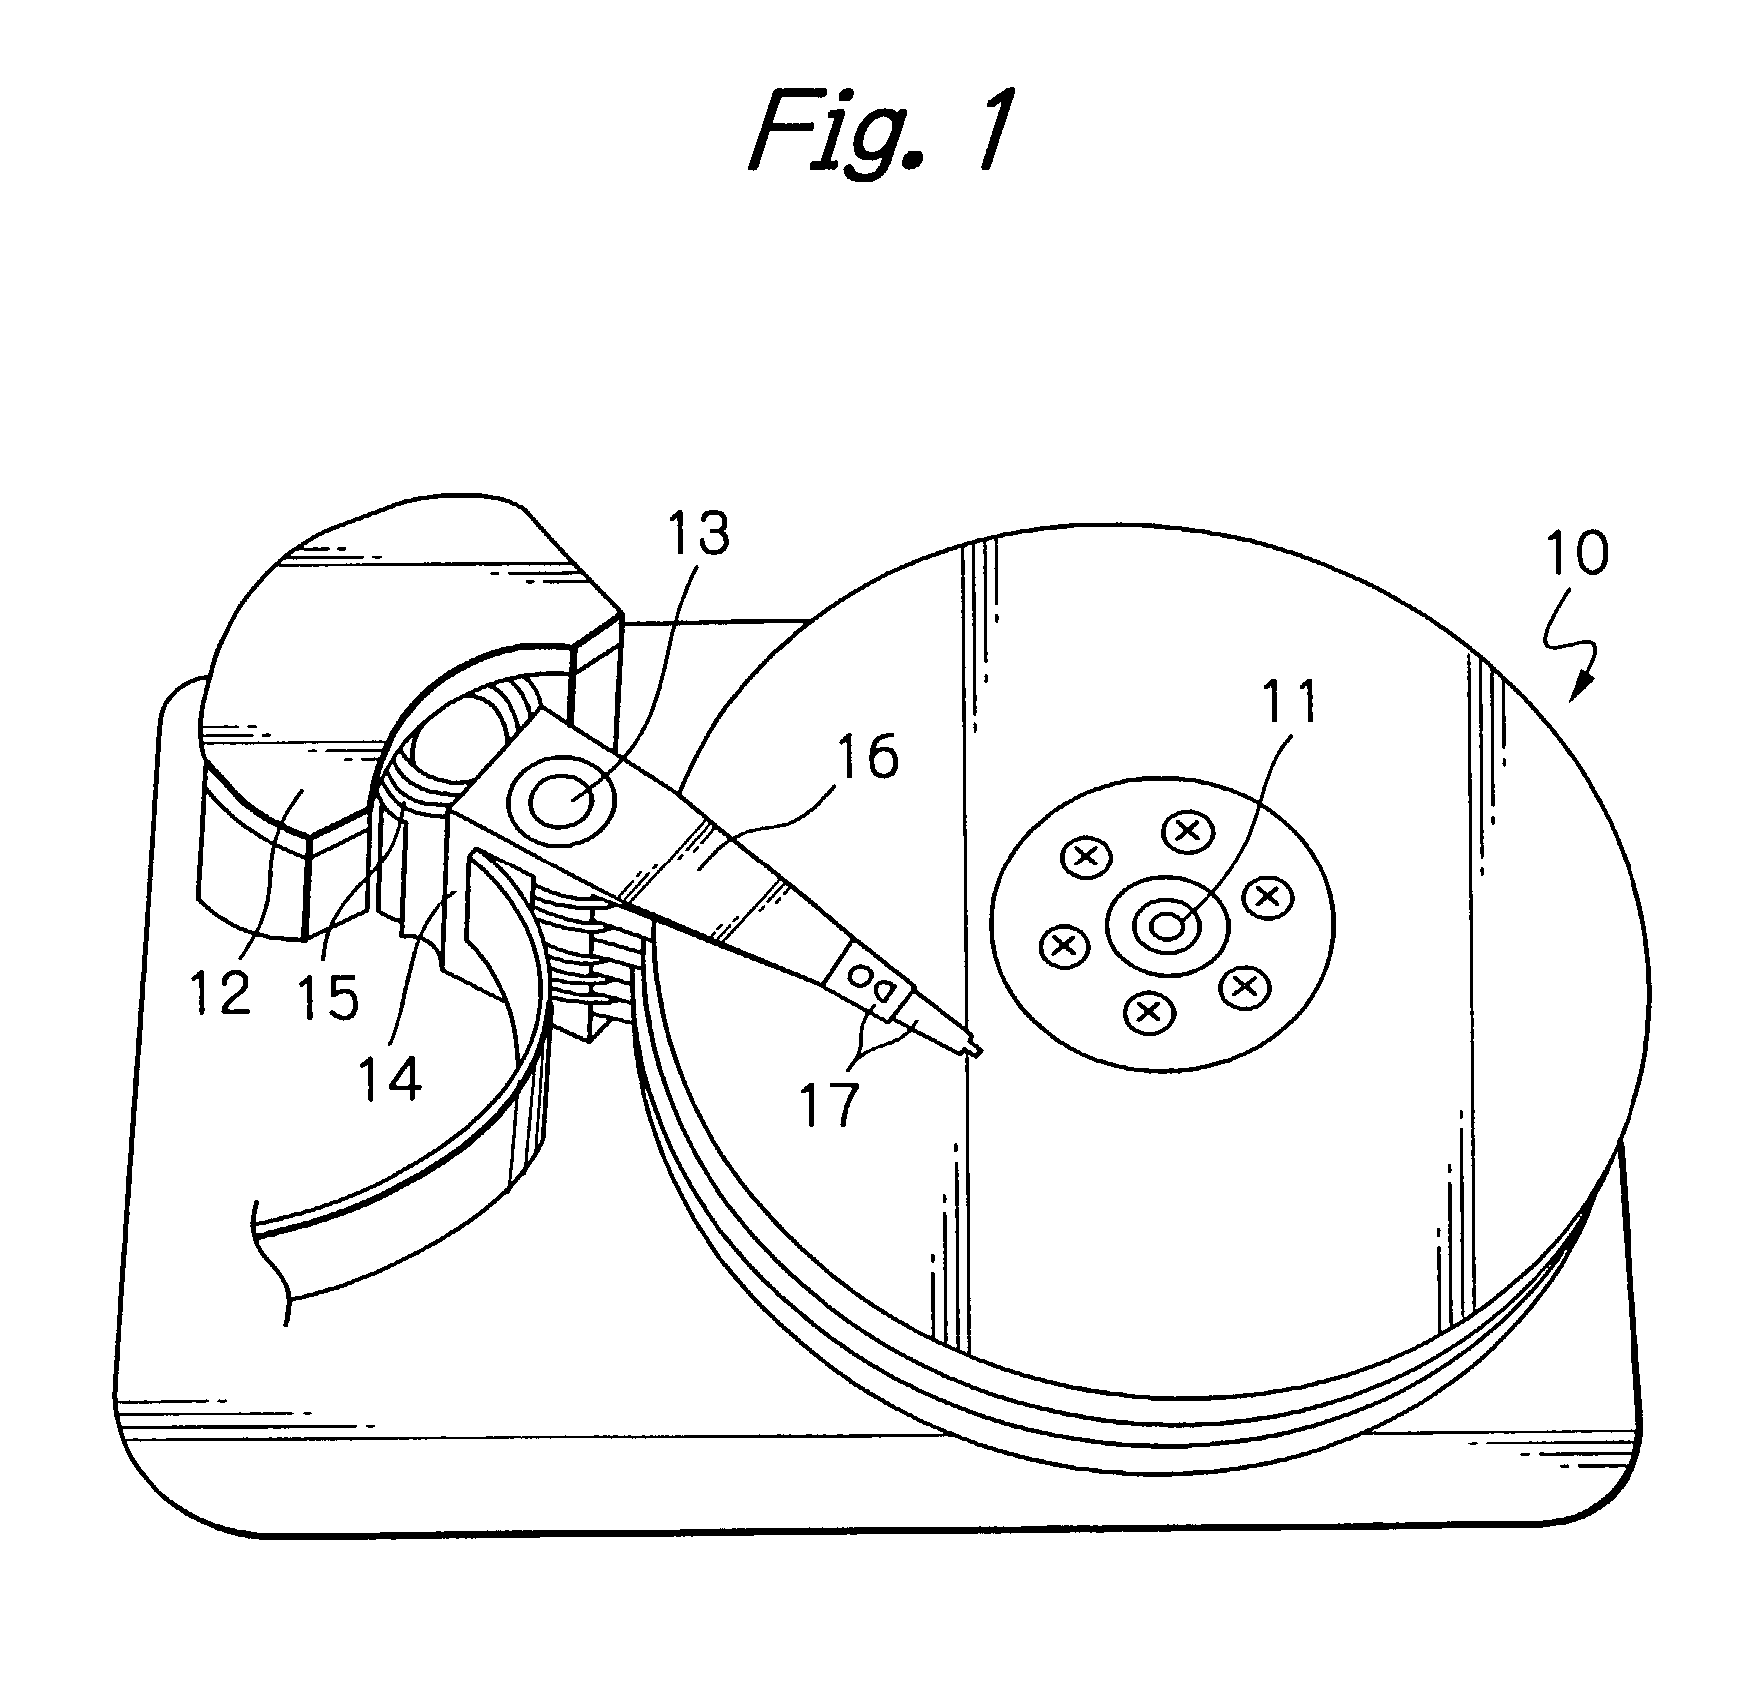 Head gimbal assembly with precise positioning actuator for head element, disk drive apparatus with the head gimbal assembly, and manufacturing method of the head gimbal assembly